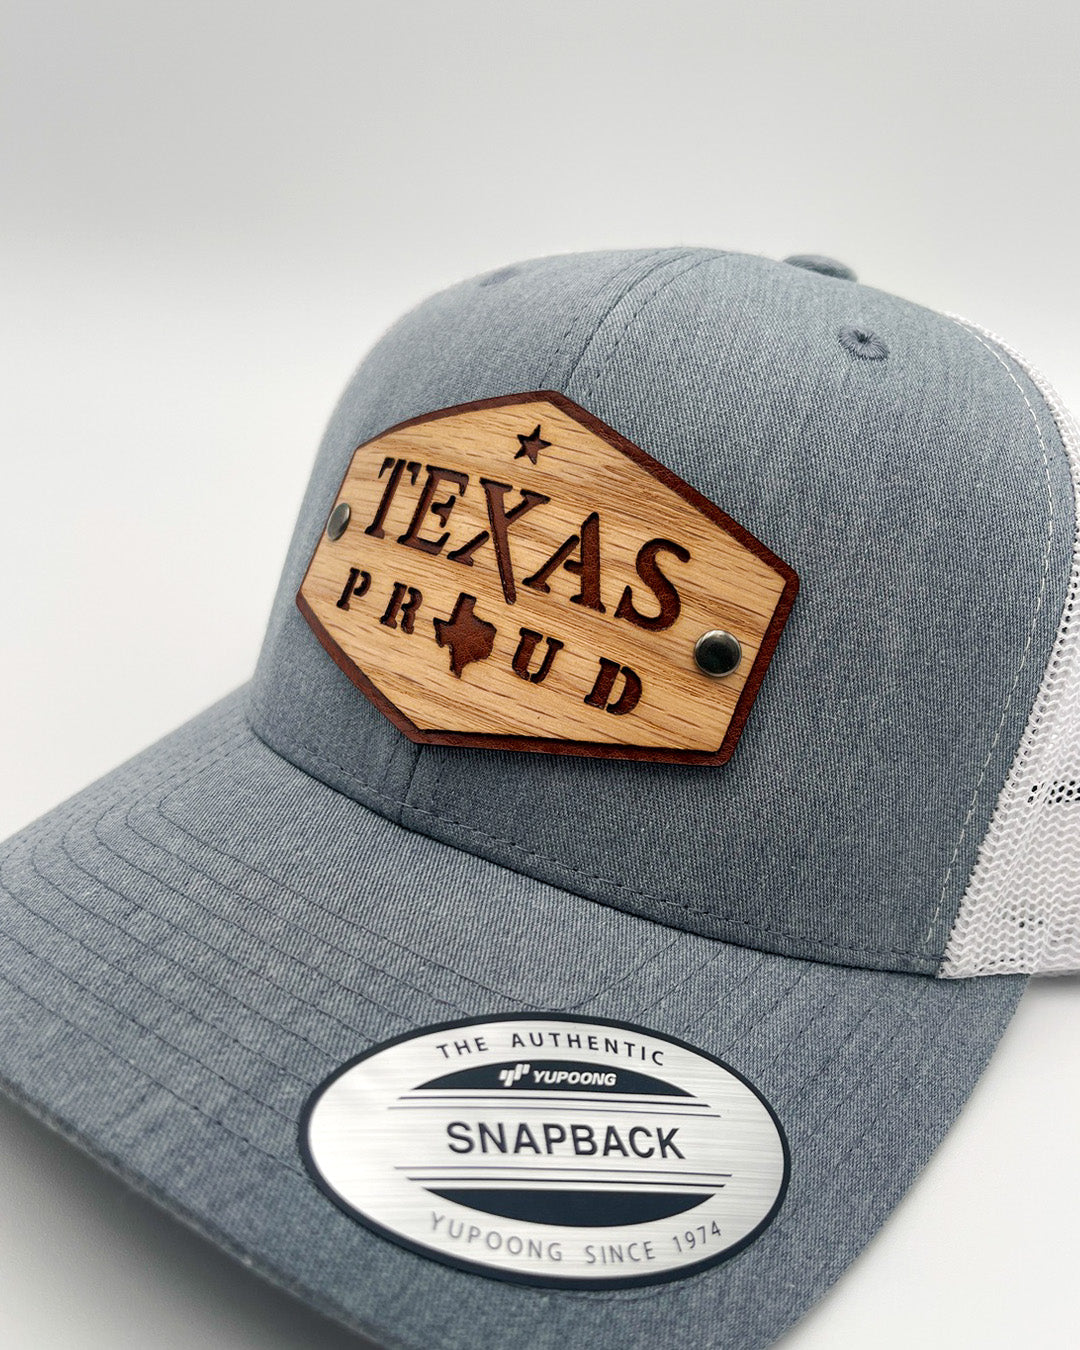 Affordable Custom Hats & Caps Original Texas Proud Edition Real Wood & Leather Patch Hat Retro Trucker Mesh Cap